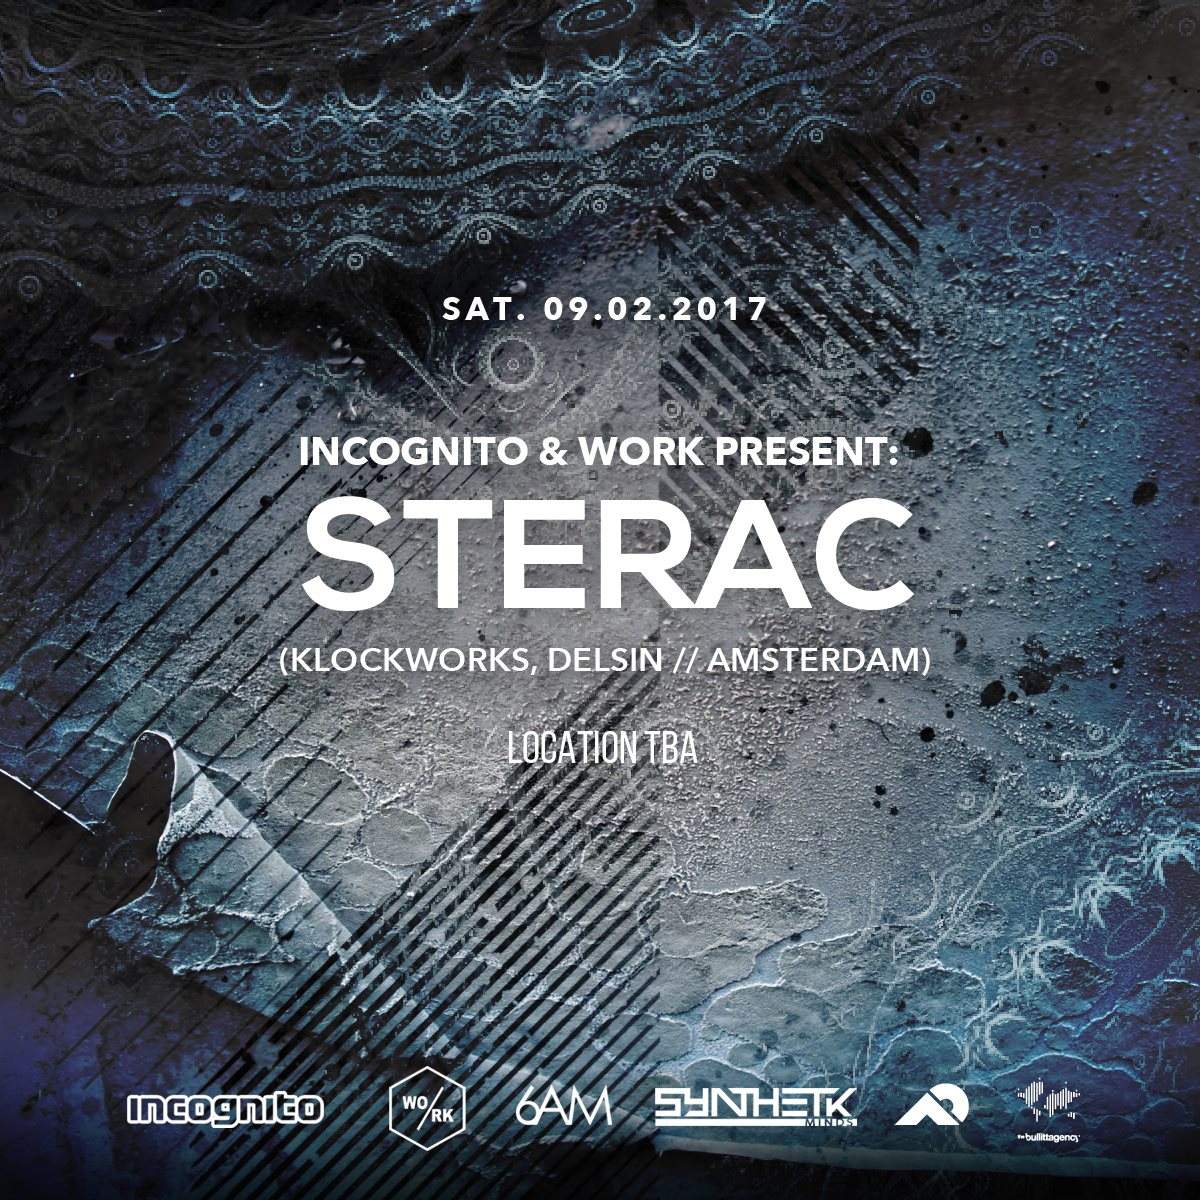 STERAC presented by Incognito x Work - フライヤー表